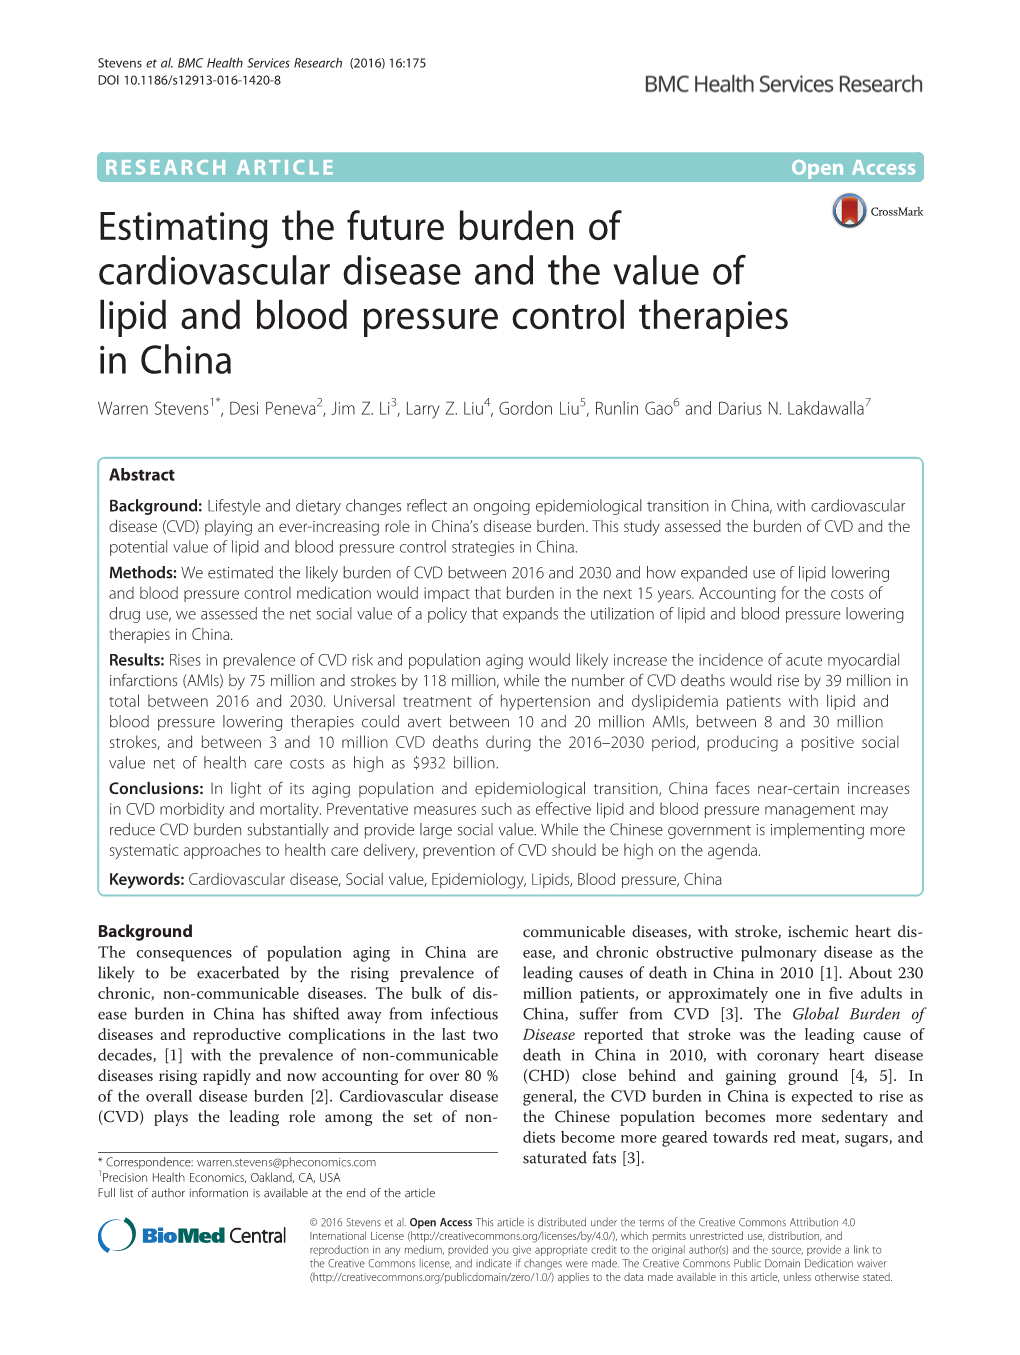 Estimating the Future Burden of Cardiovascular Disease and the Value of Lipid and Blood Pressure Control Therapies in China Warren Stevens1*, Desi Peneva2, Jim Z